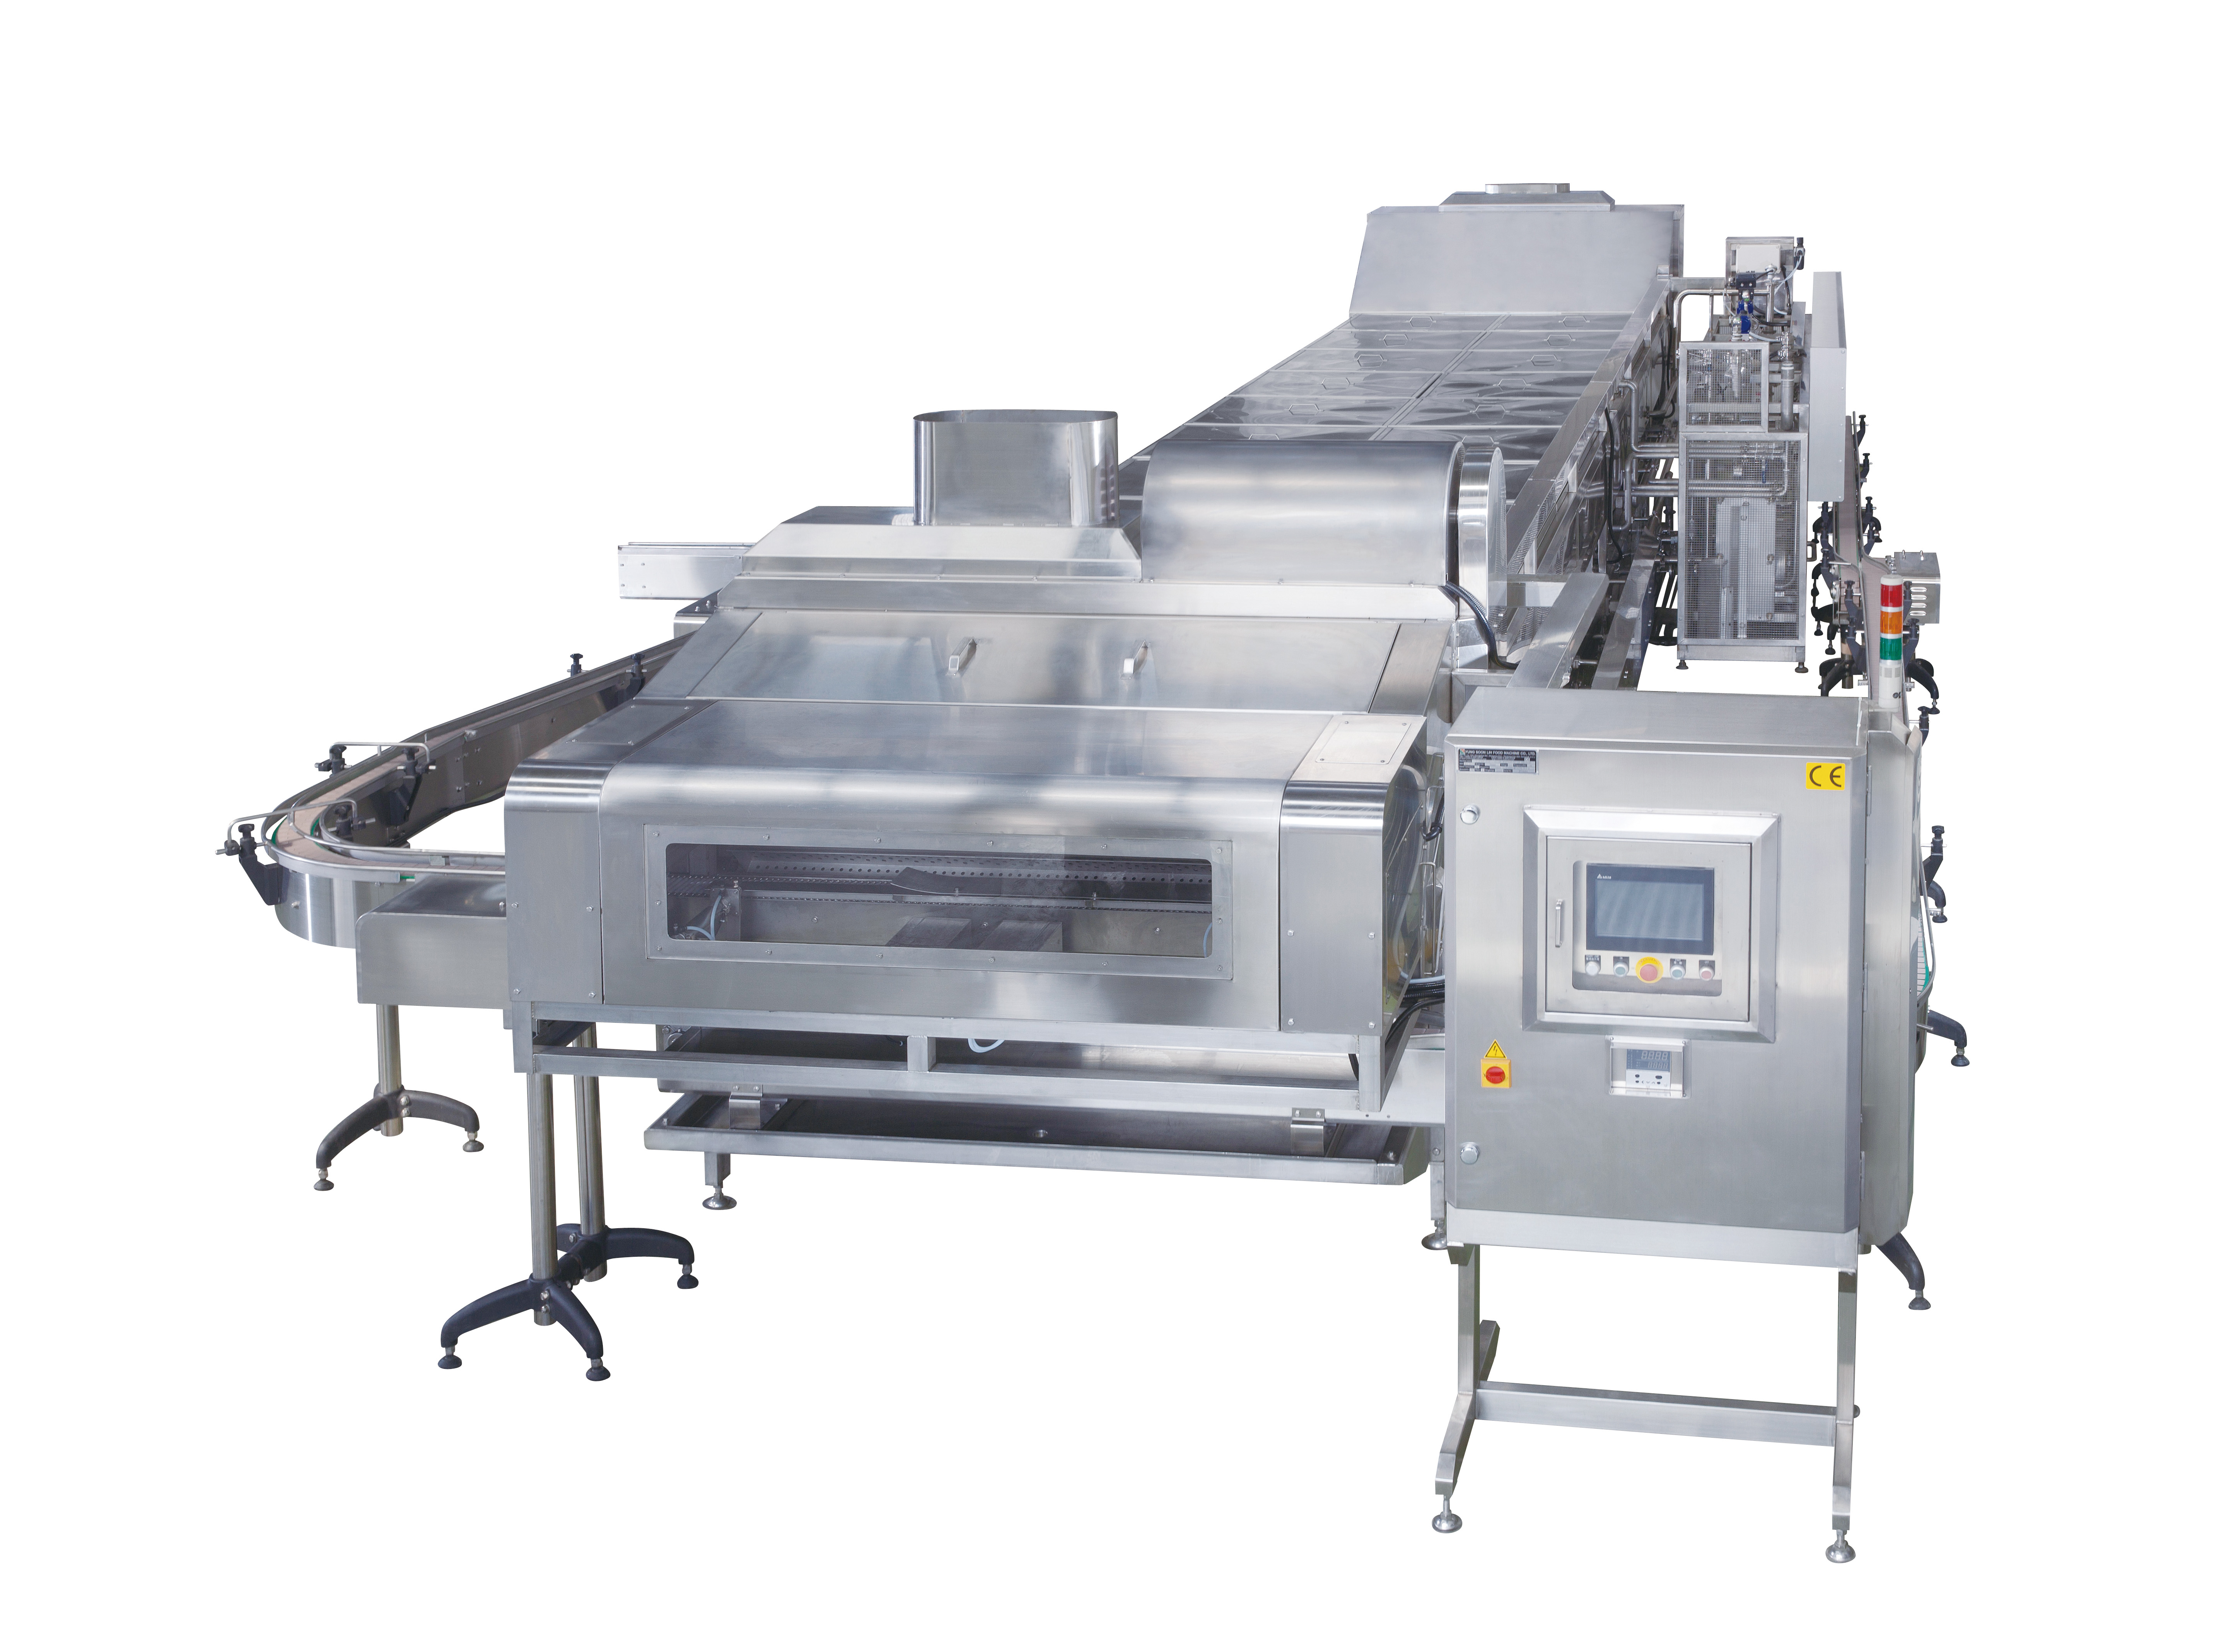 Pasteurizing and Cooling Equipment is one of the machines in the tofu production line.